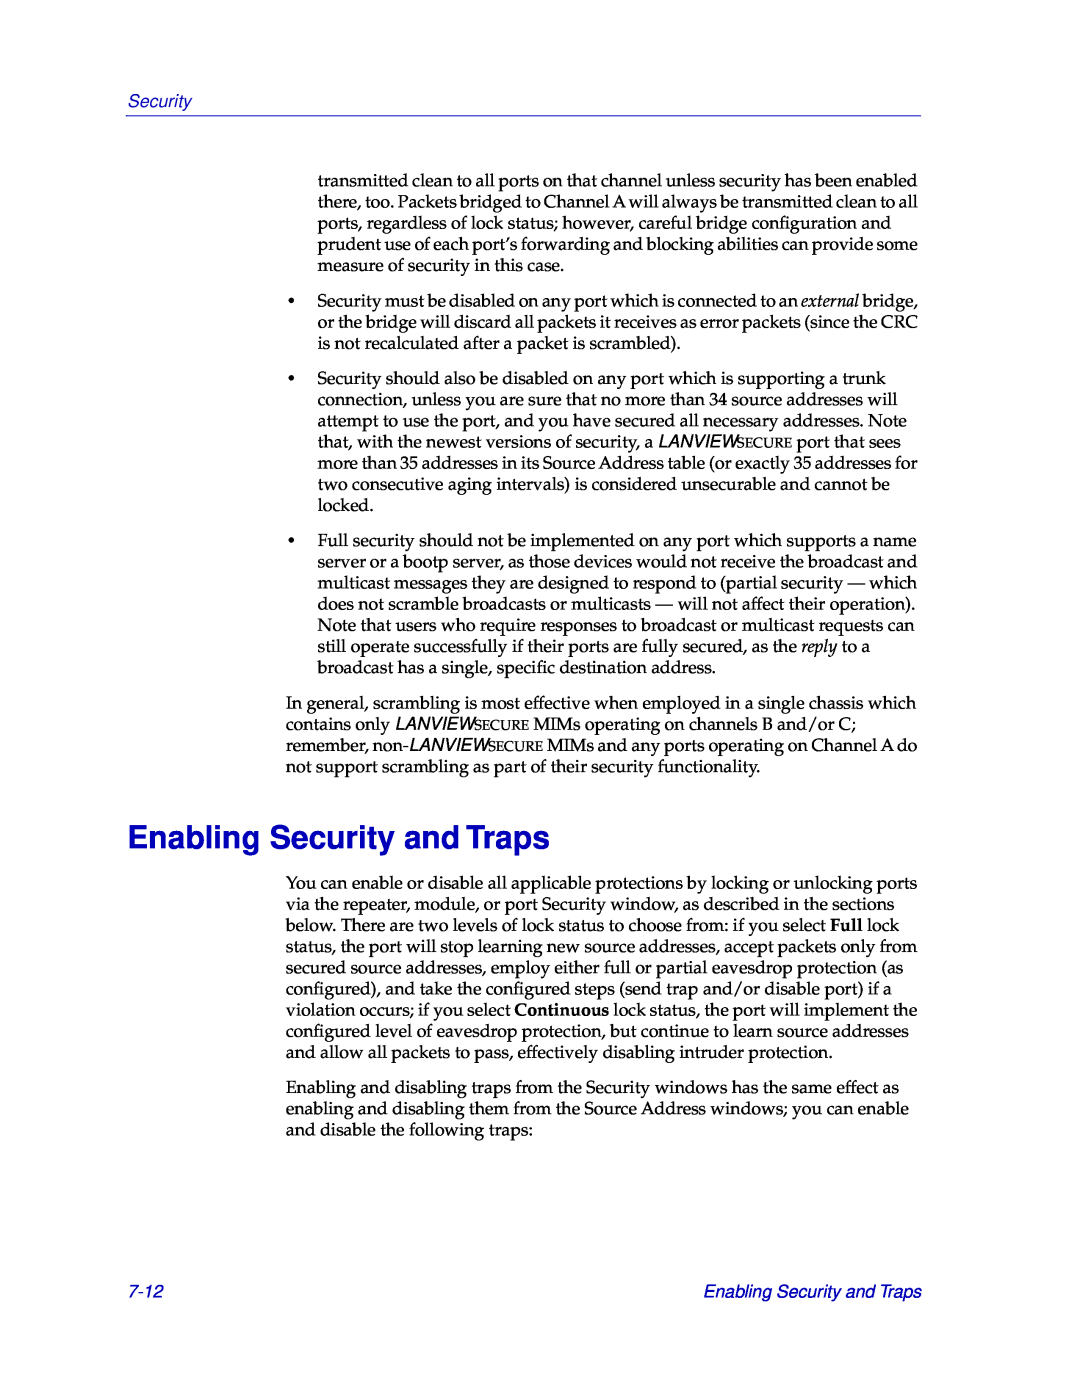 Cabletron Systems EMM-E6 manual Enabling Security and Traps, 7-12 